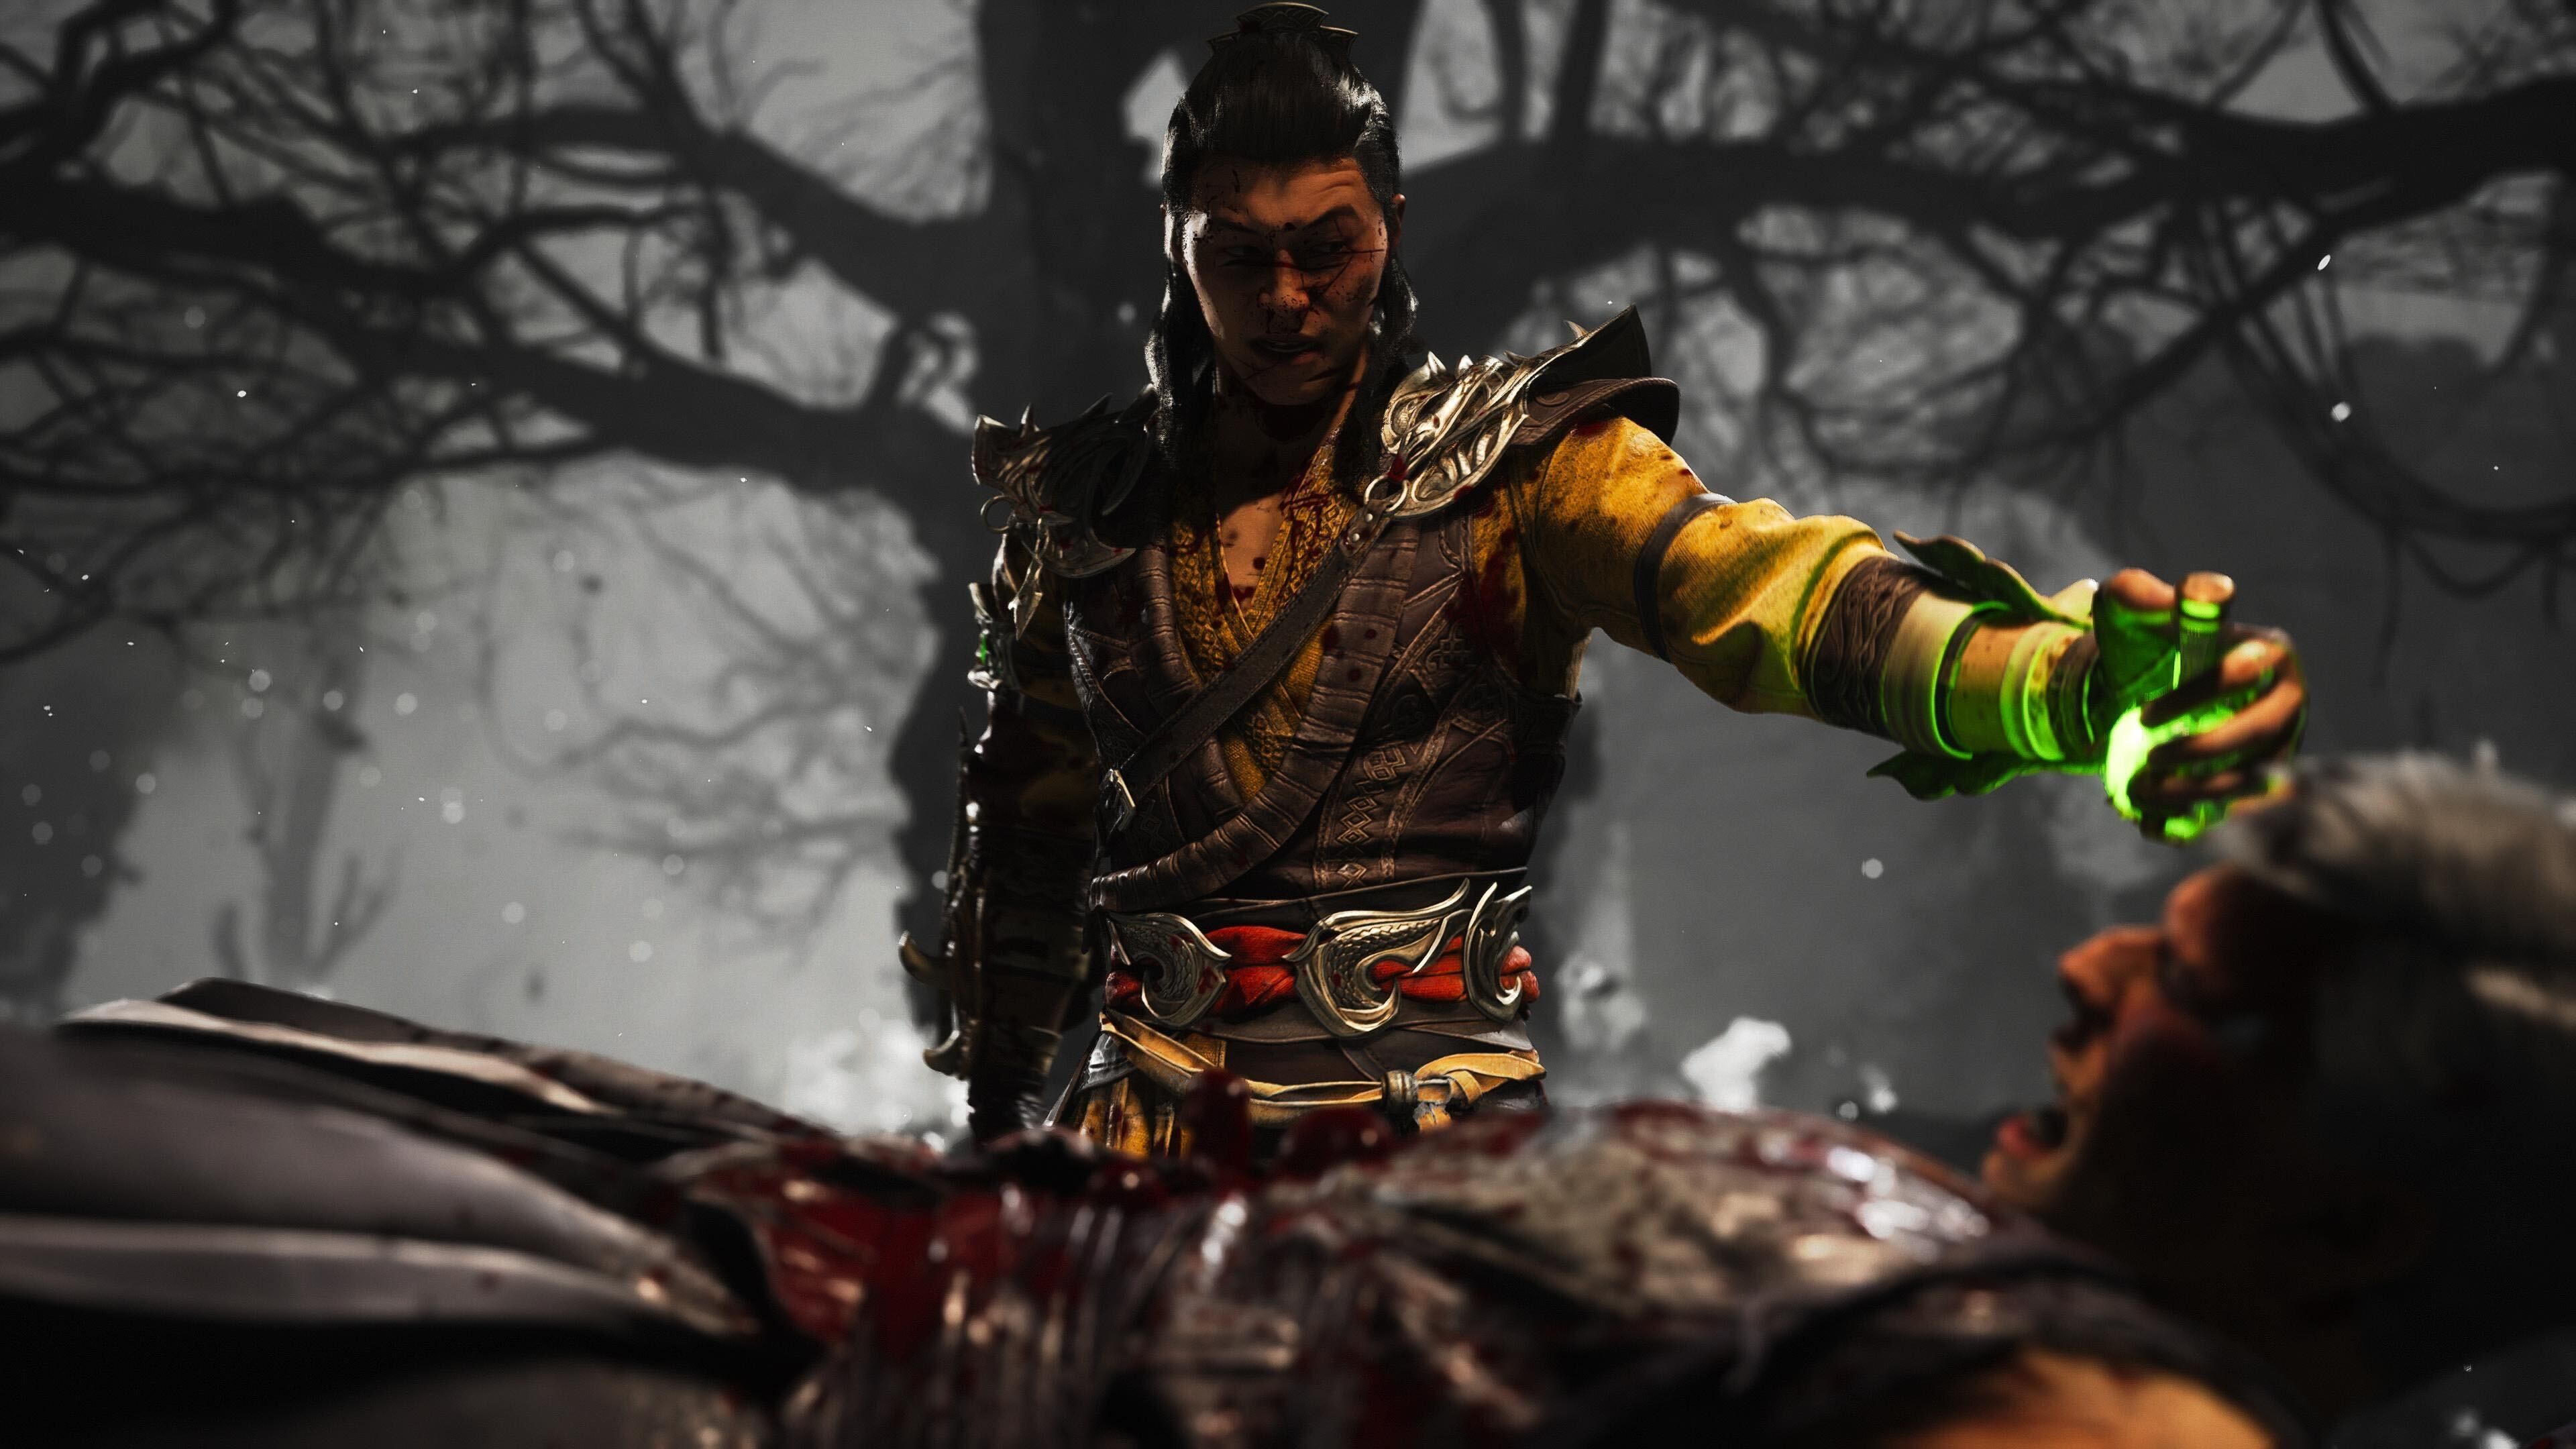 Shang Tsung pouring liquid in an opponent's belly in Mortal Kombat 1.